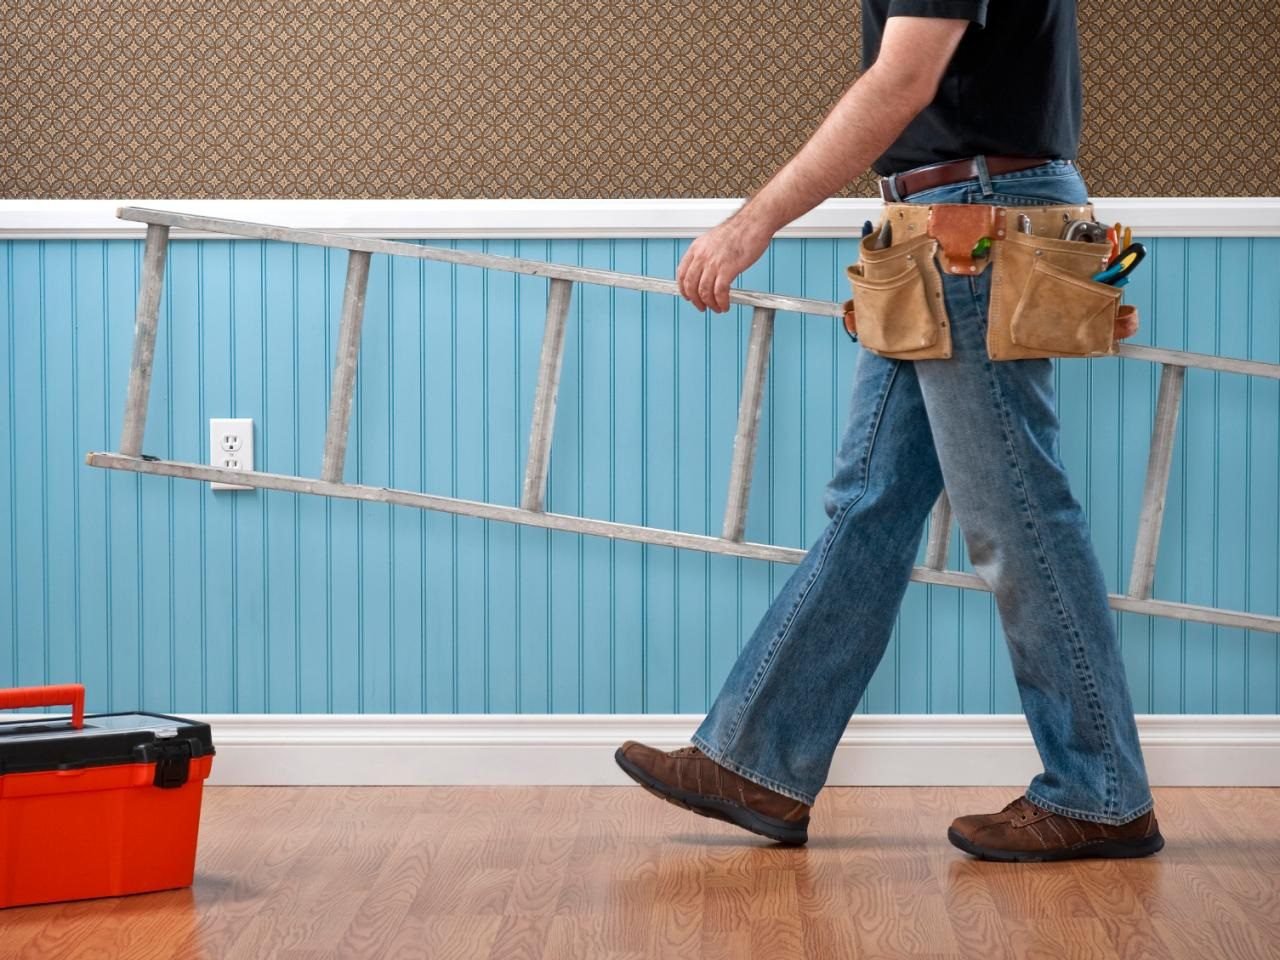 How to Choose a Renovation or Remodeling Contractor